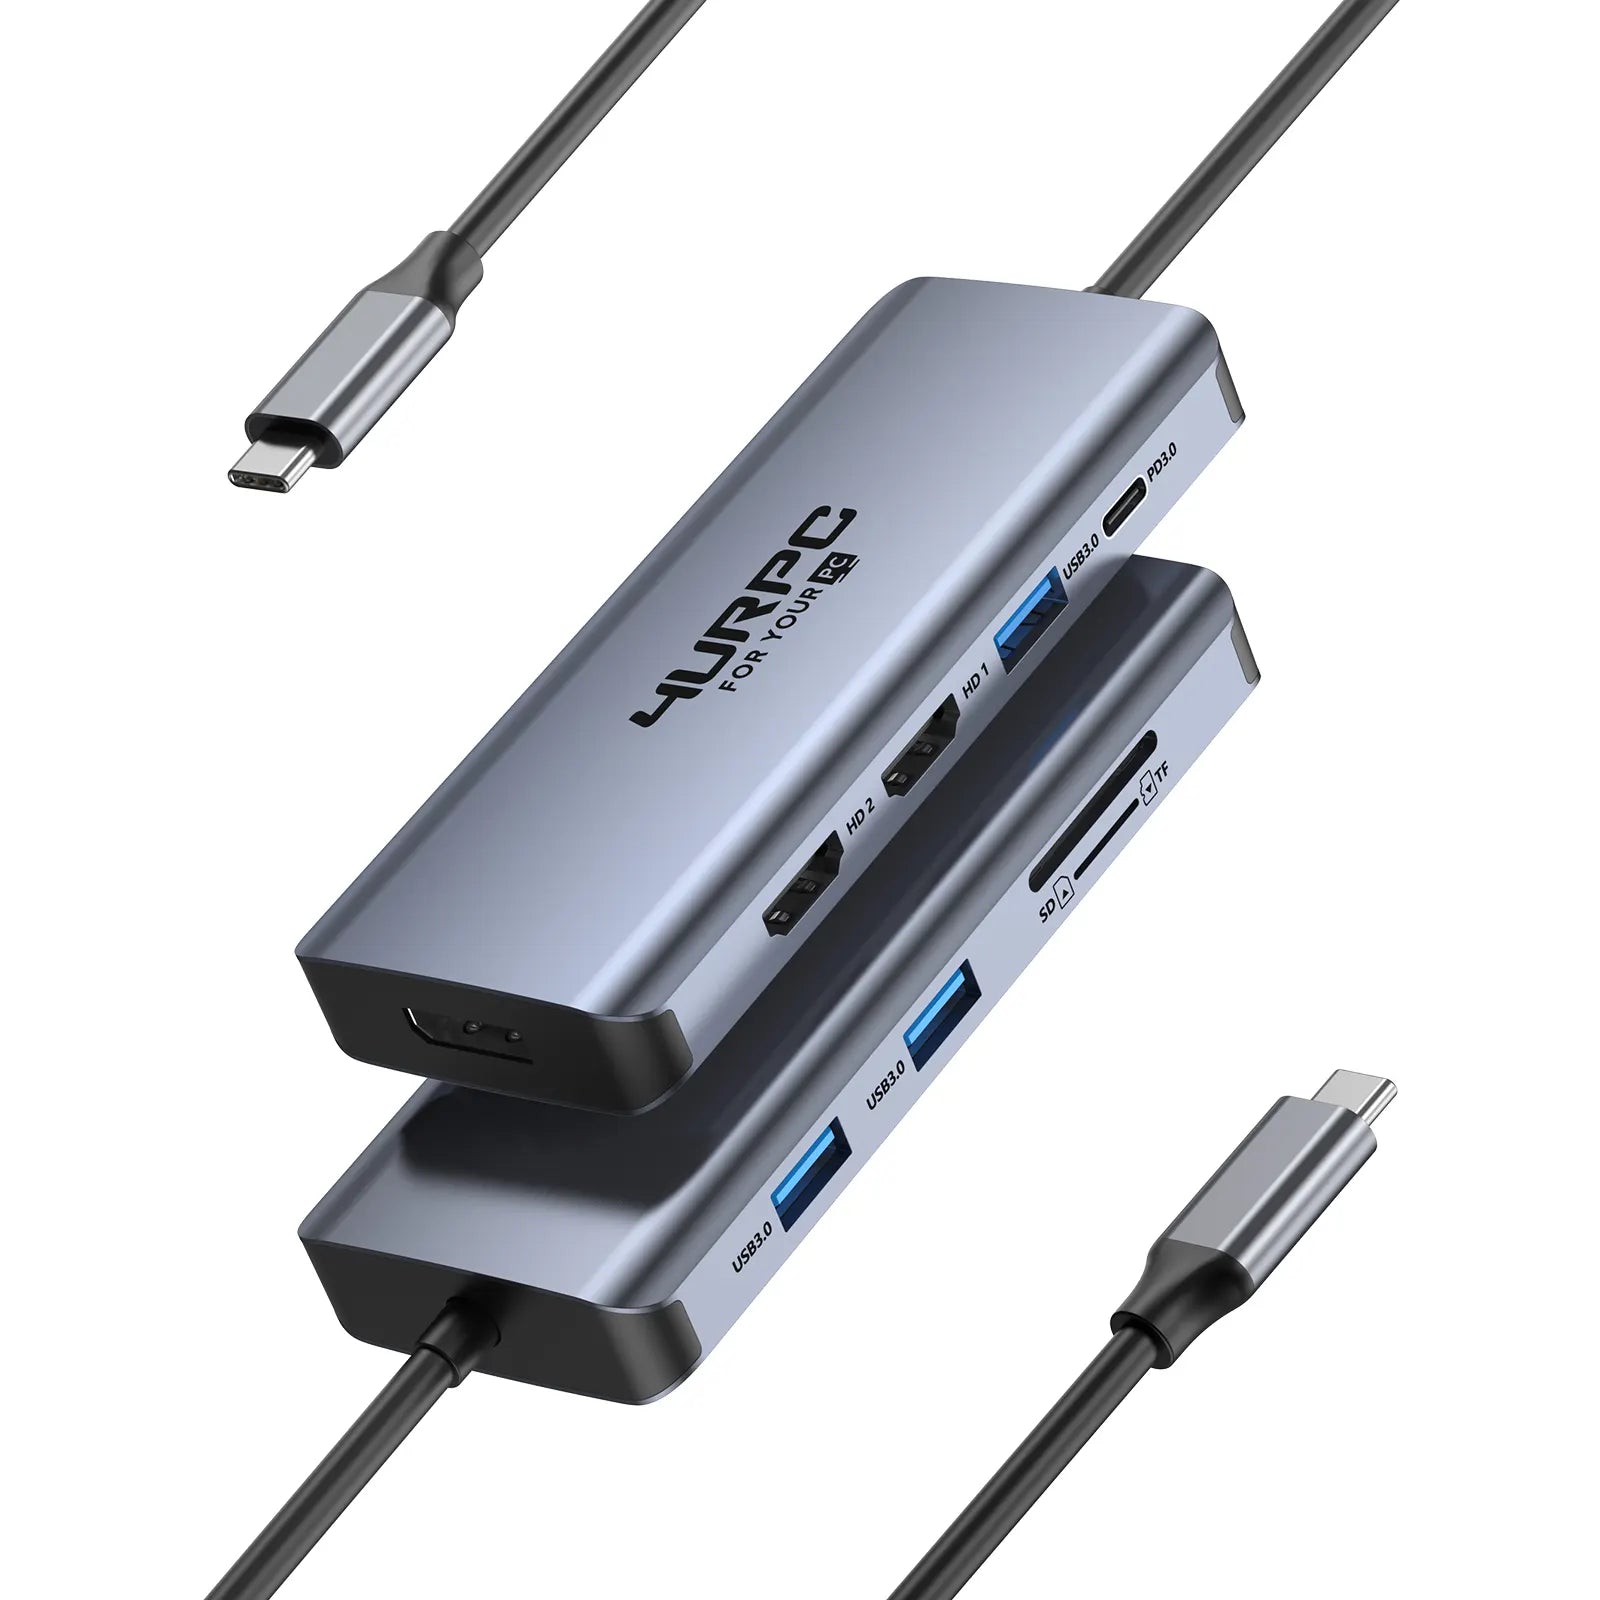 What's the difference between a USB-C hub and a docking station?